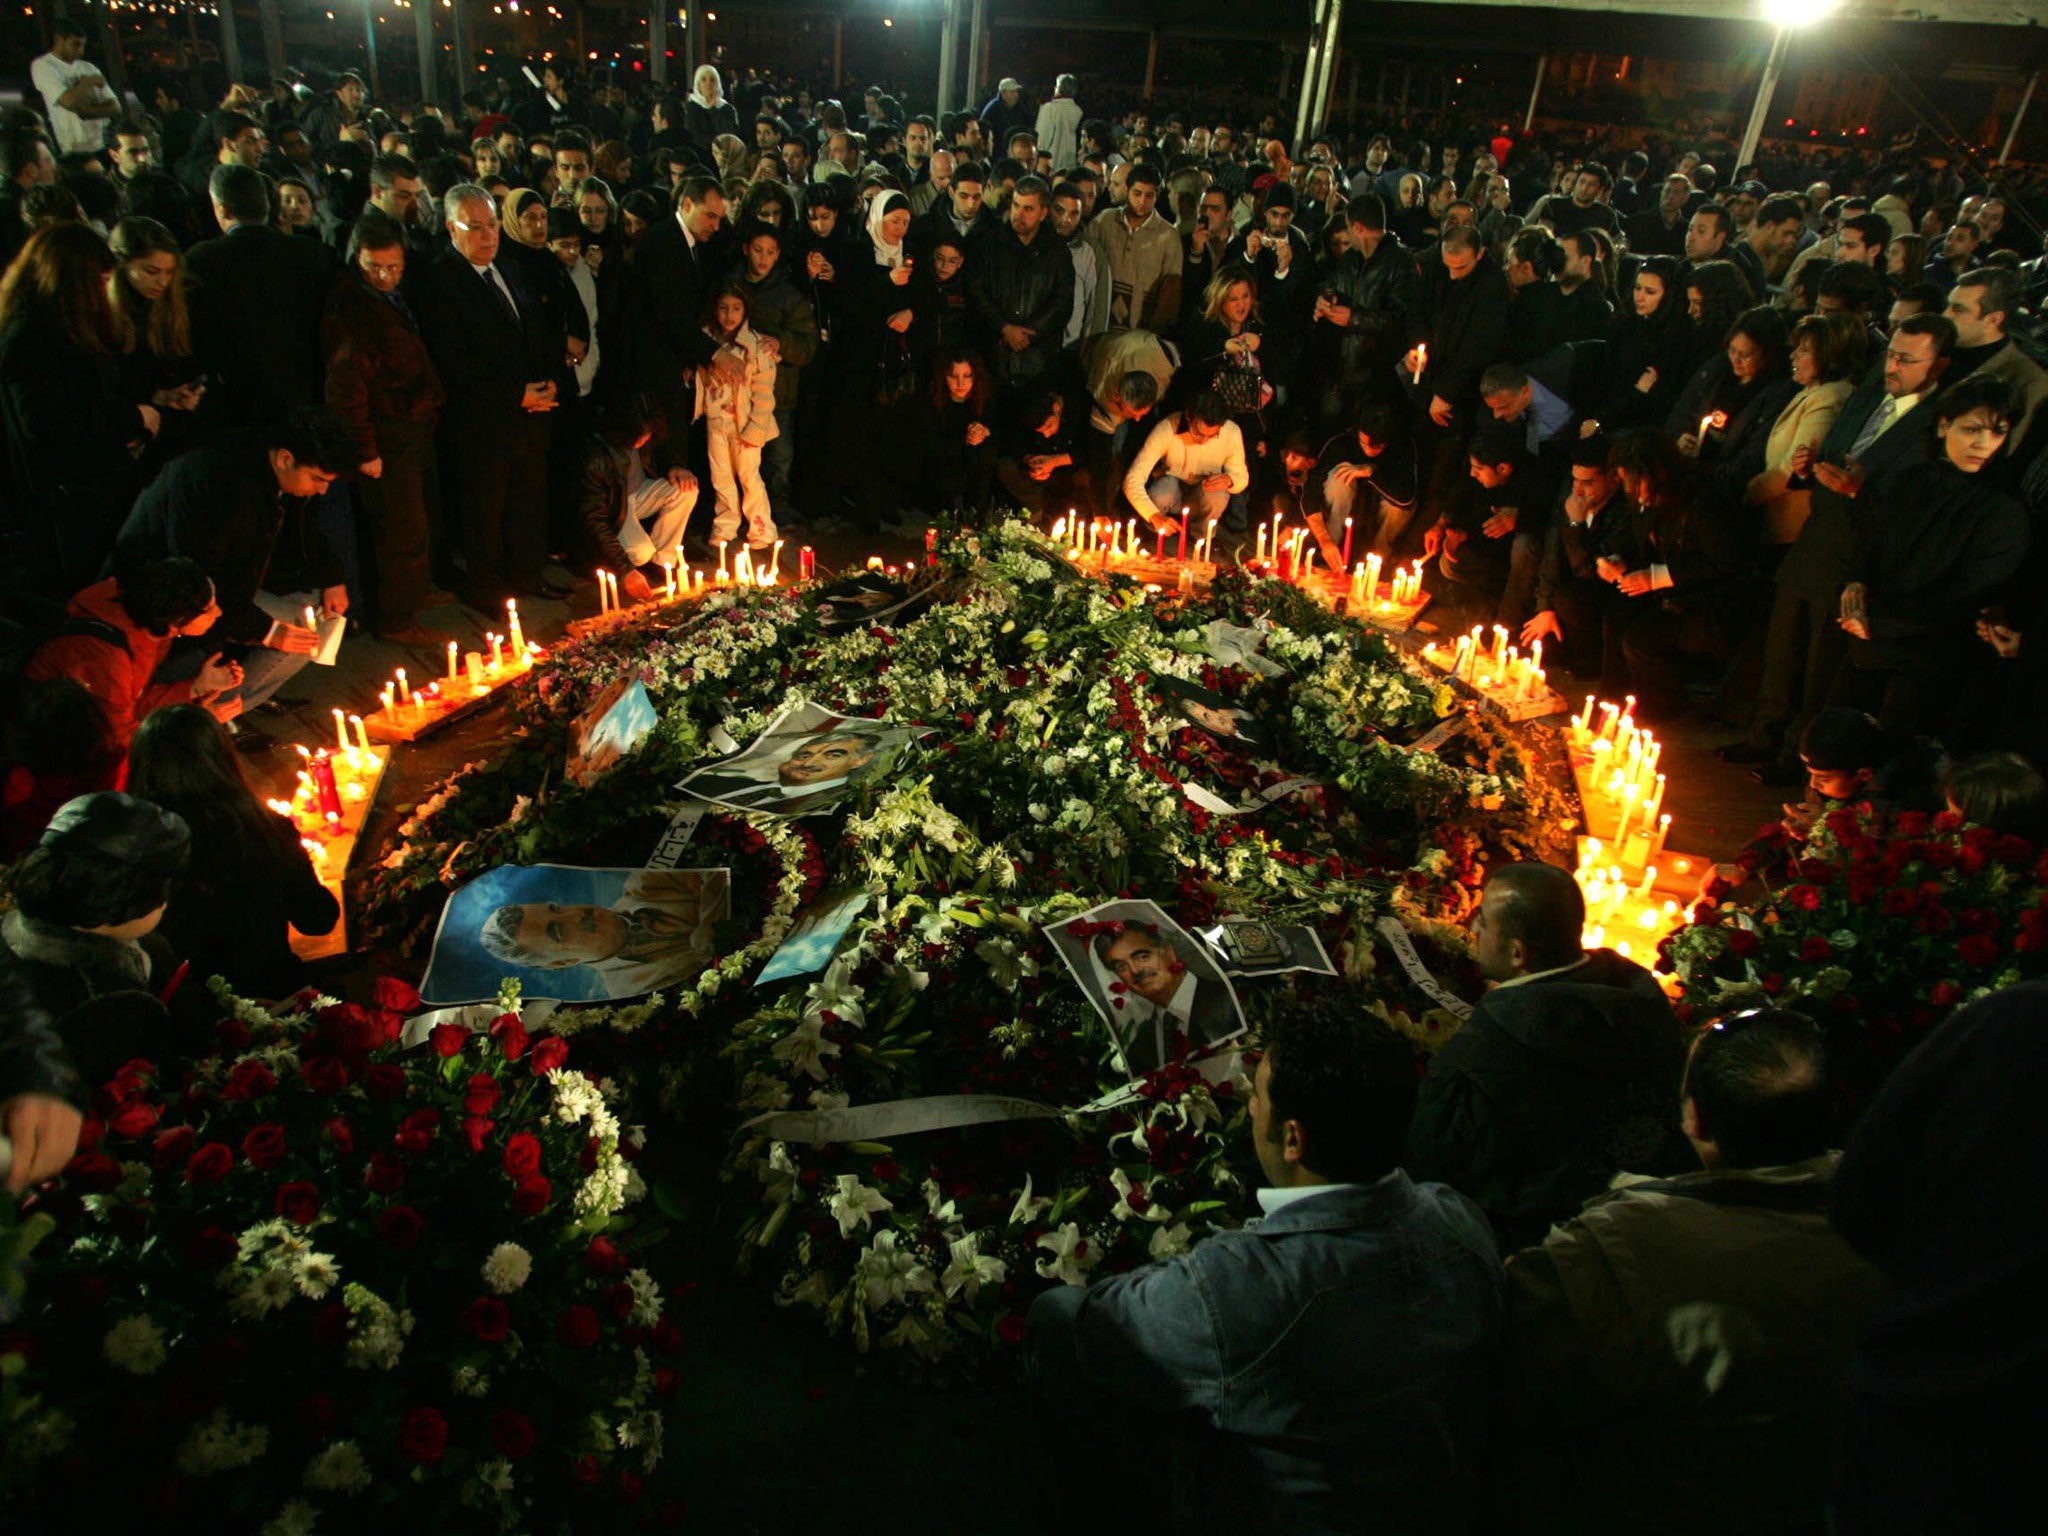 The grave of the murdered former Prime Minister Rafiq Hariri, killed by a car bomb in 2005, which attracted frenzied crowds